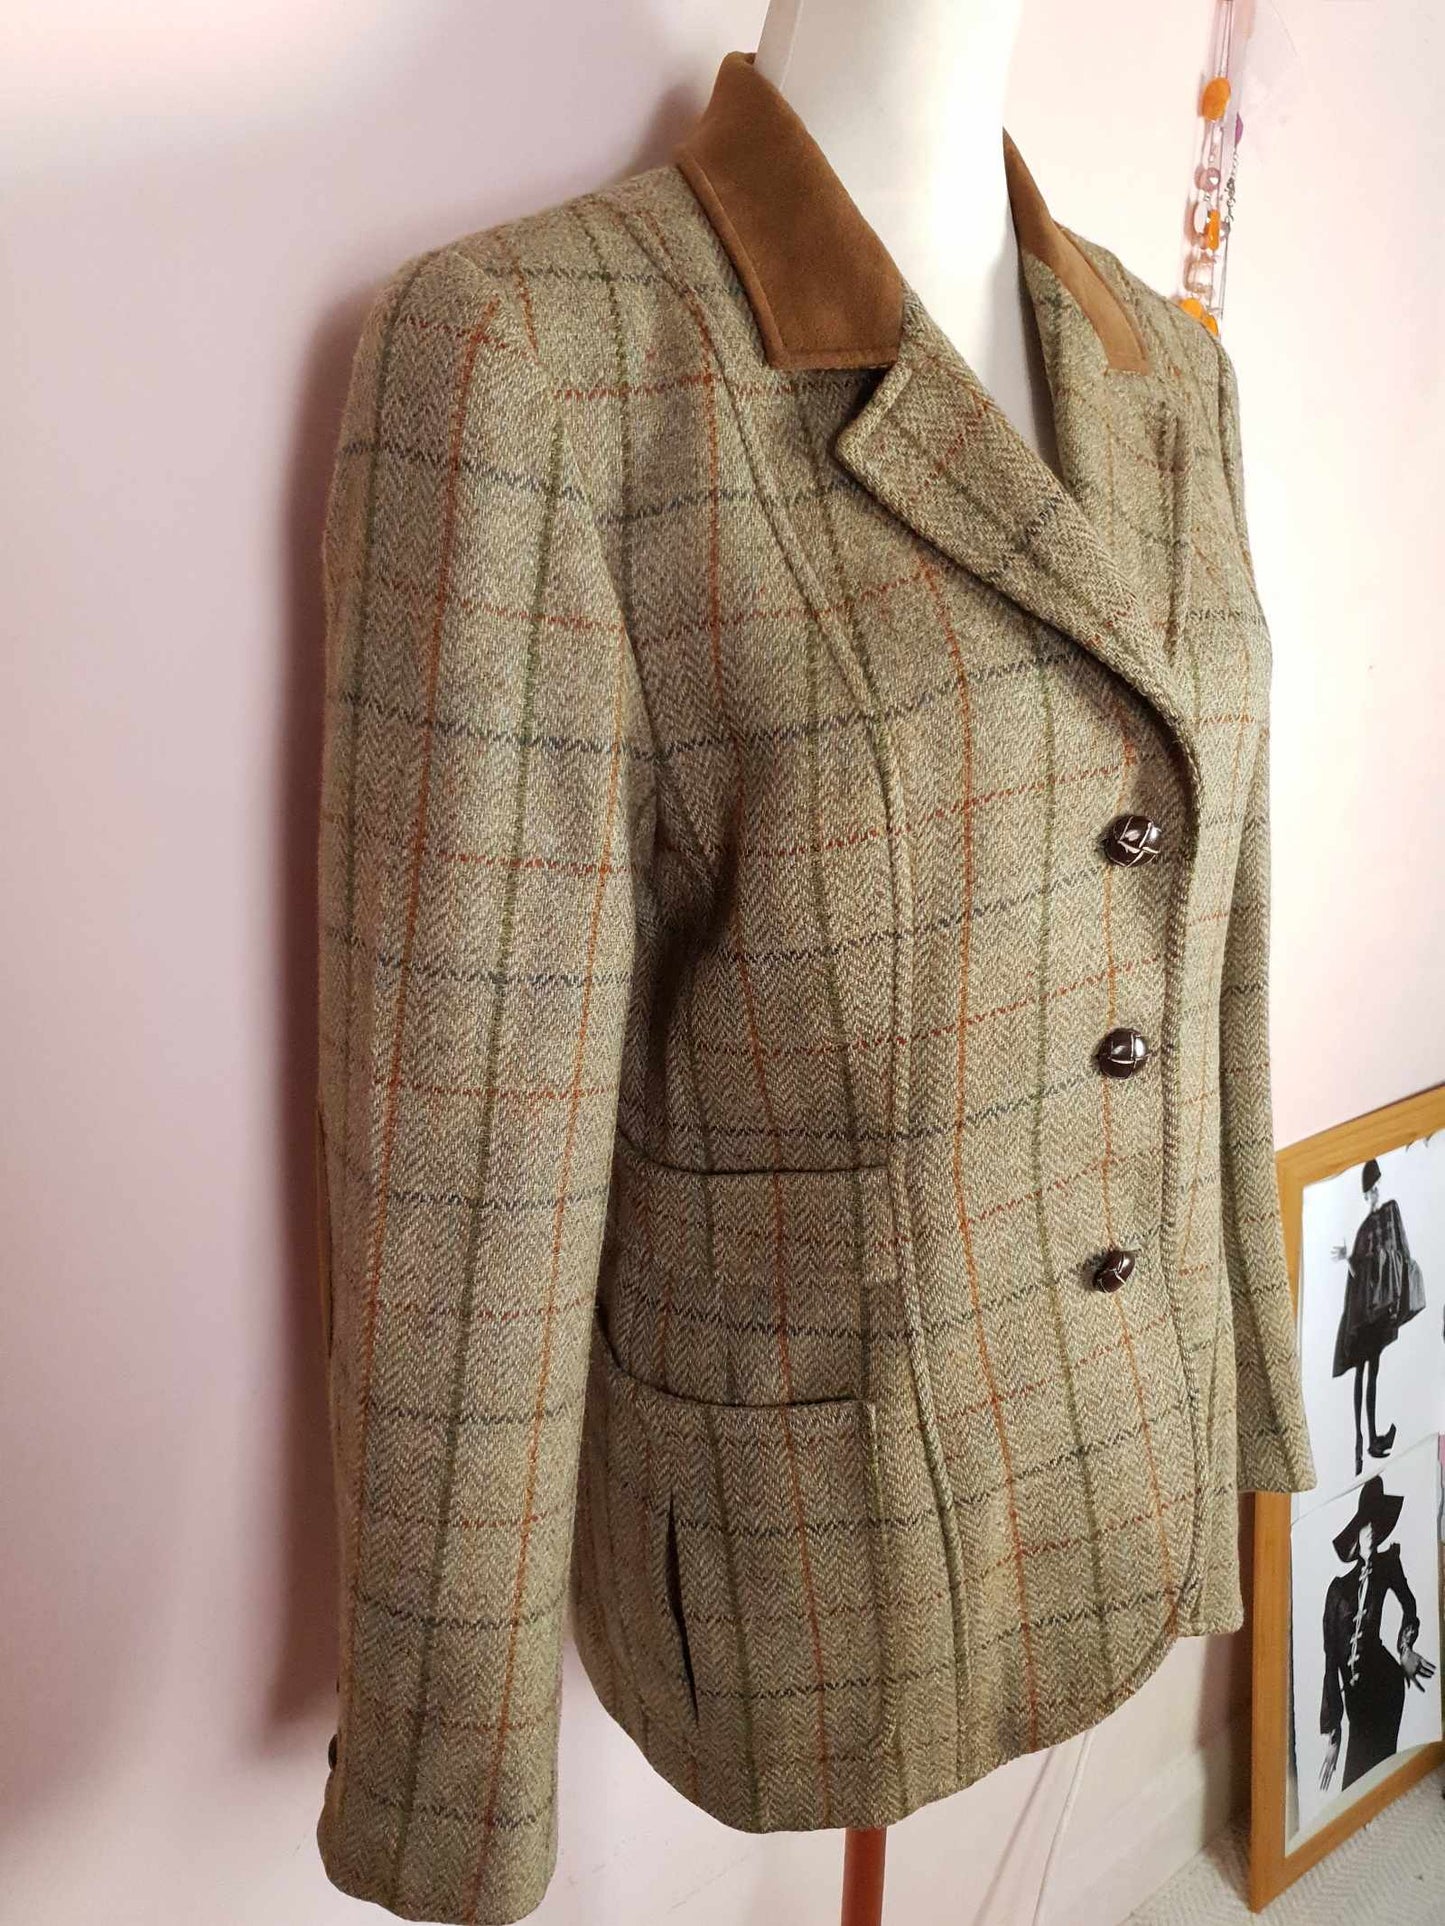 English Classics - Pre-Loved Mulberry Plaid Wool Equestrian Country Jacket - Size 14